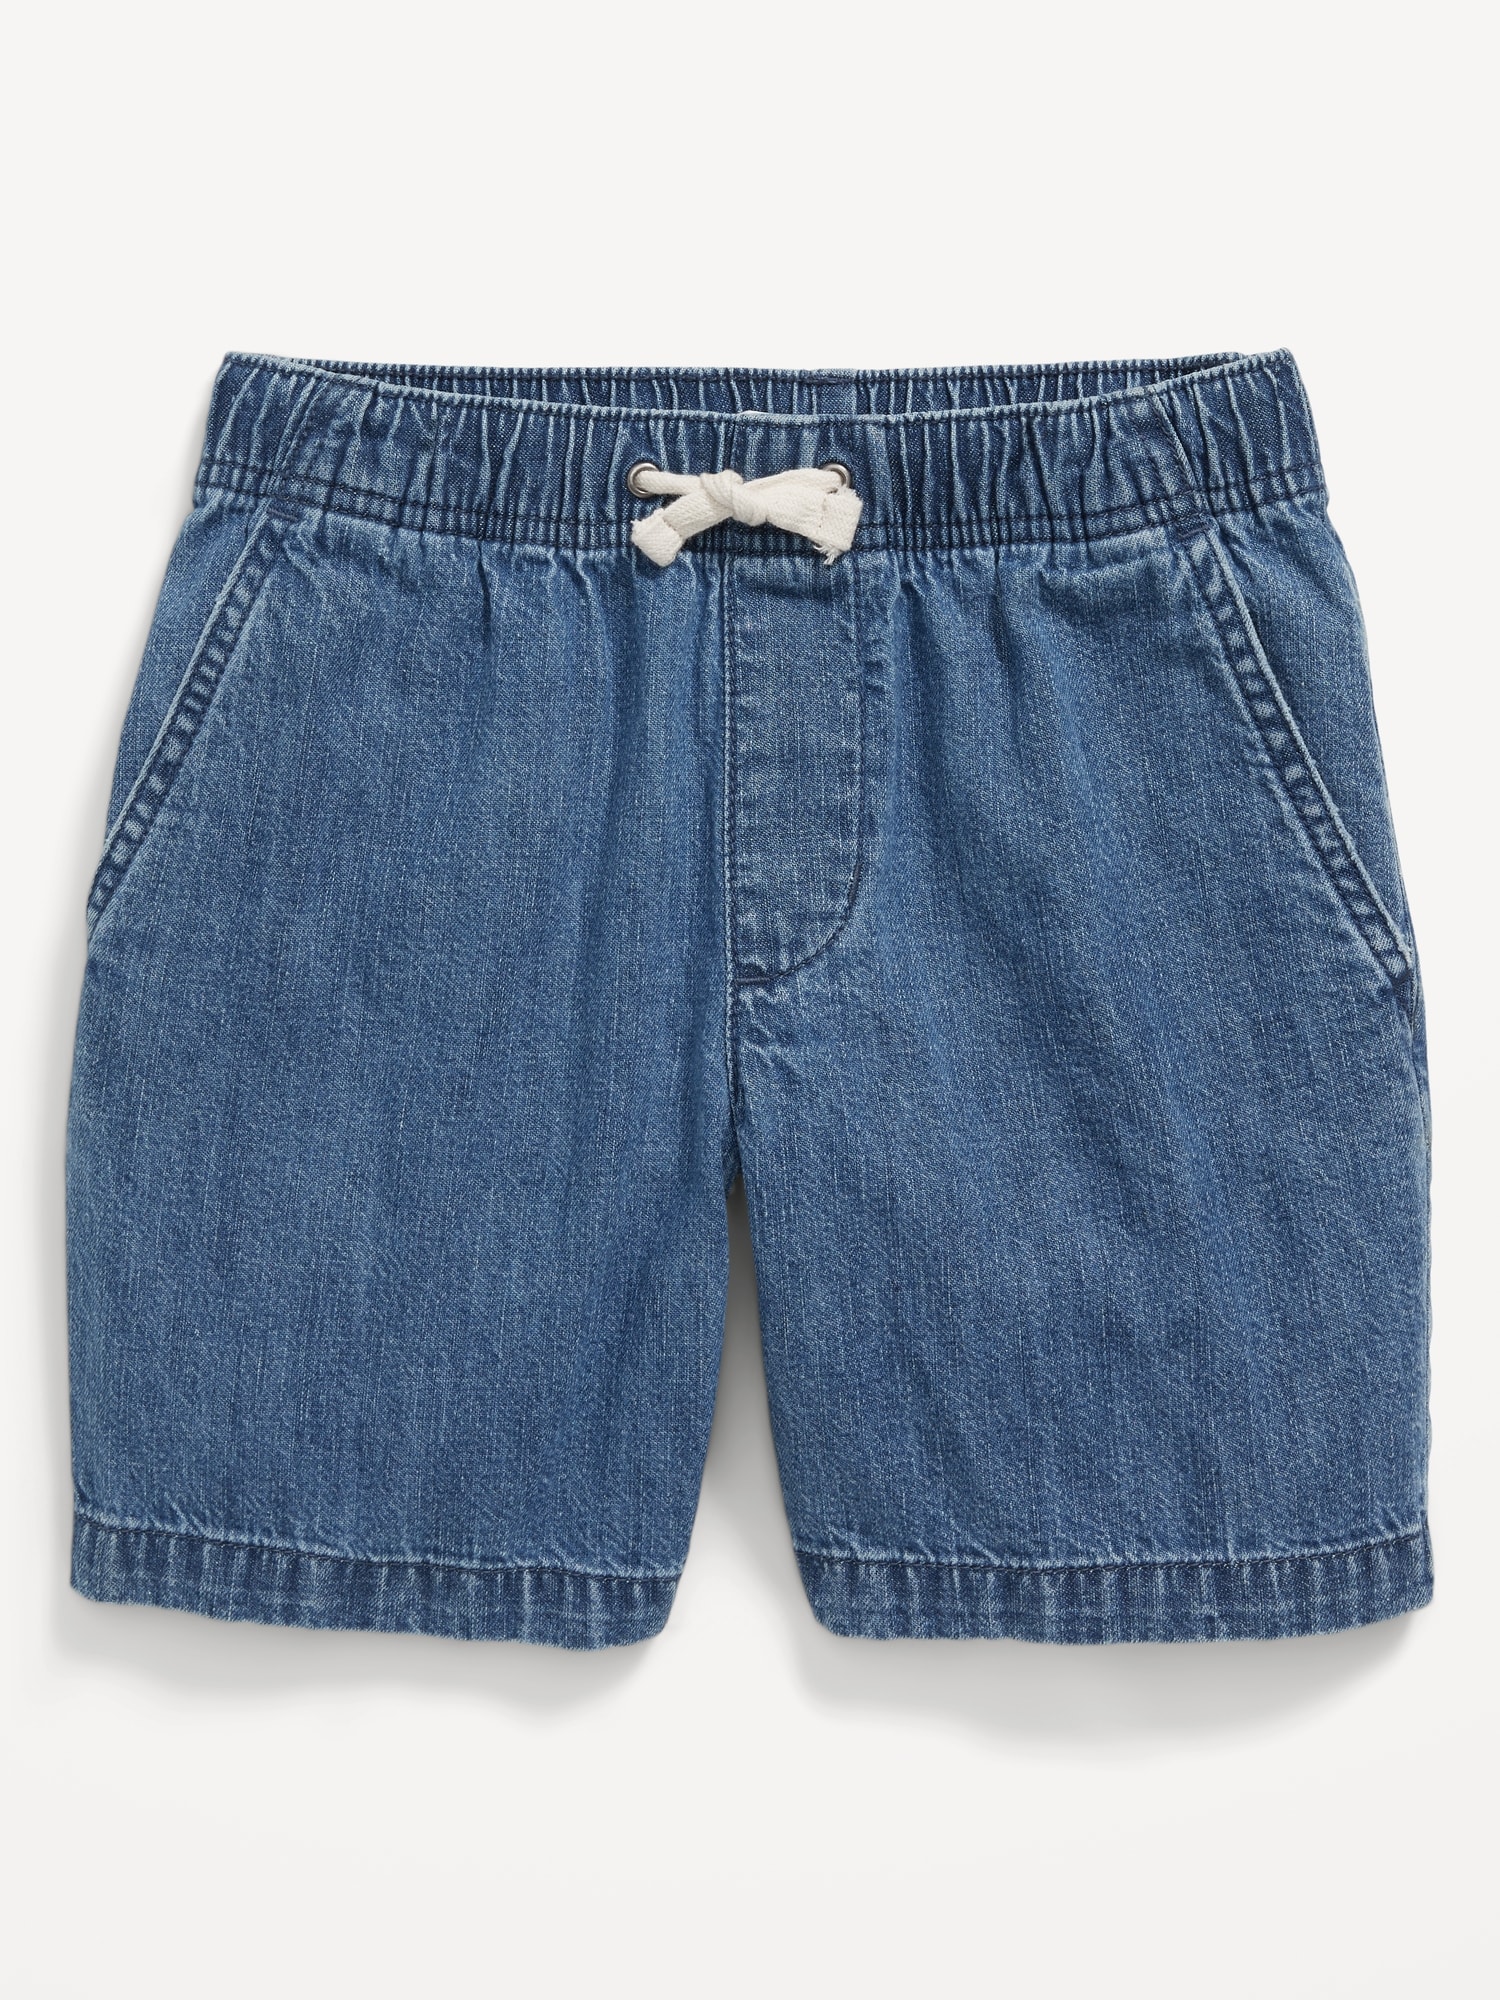 Old Navy Kids Built-In Flex Straight Twill Shorts for Boys (Above Knee) -  Gray Oyster